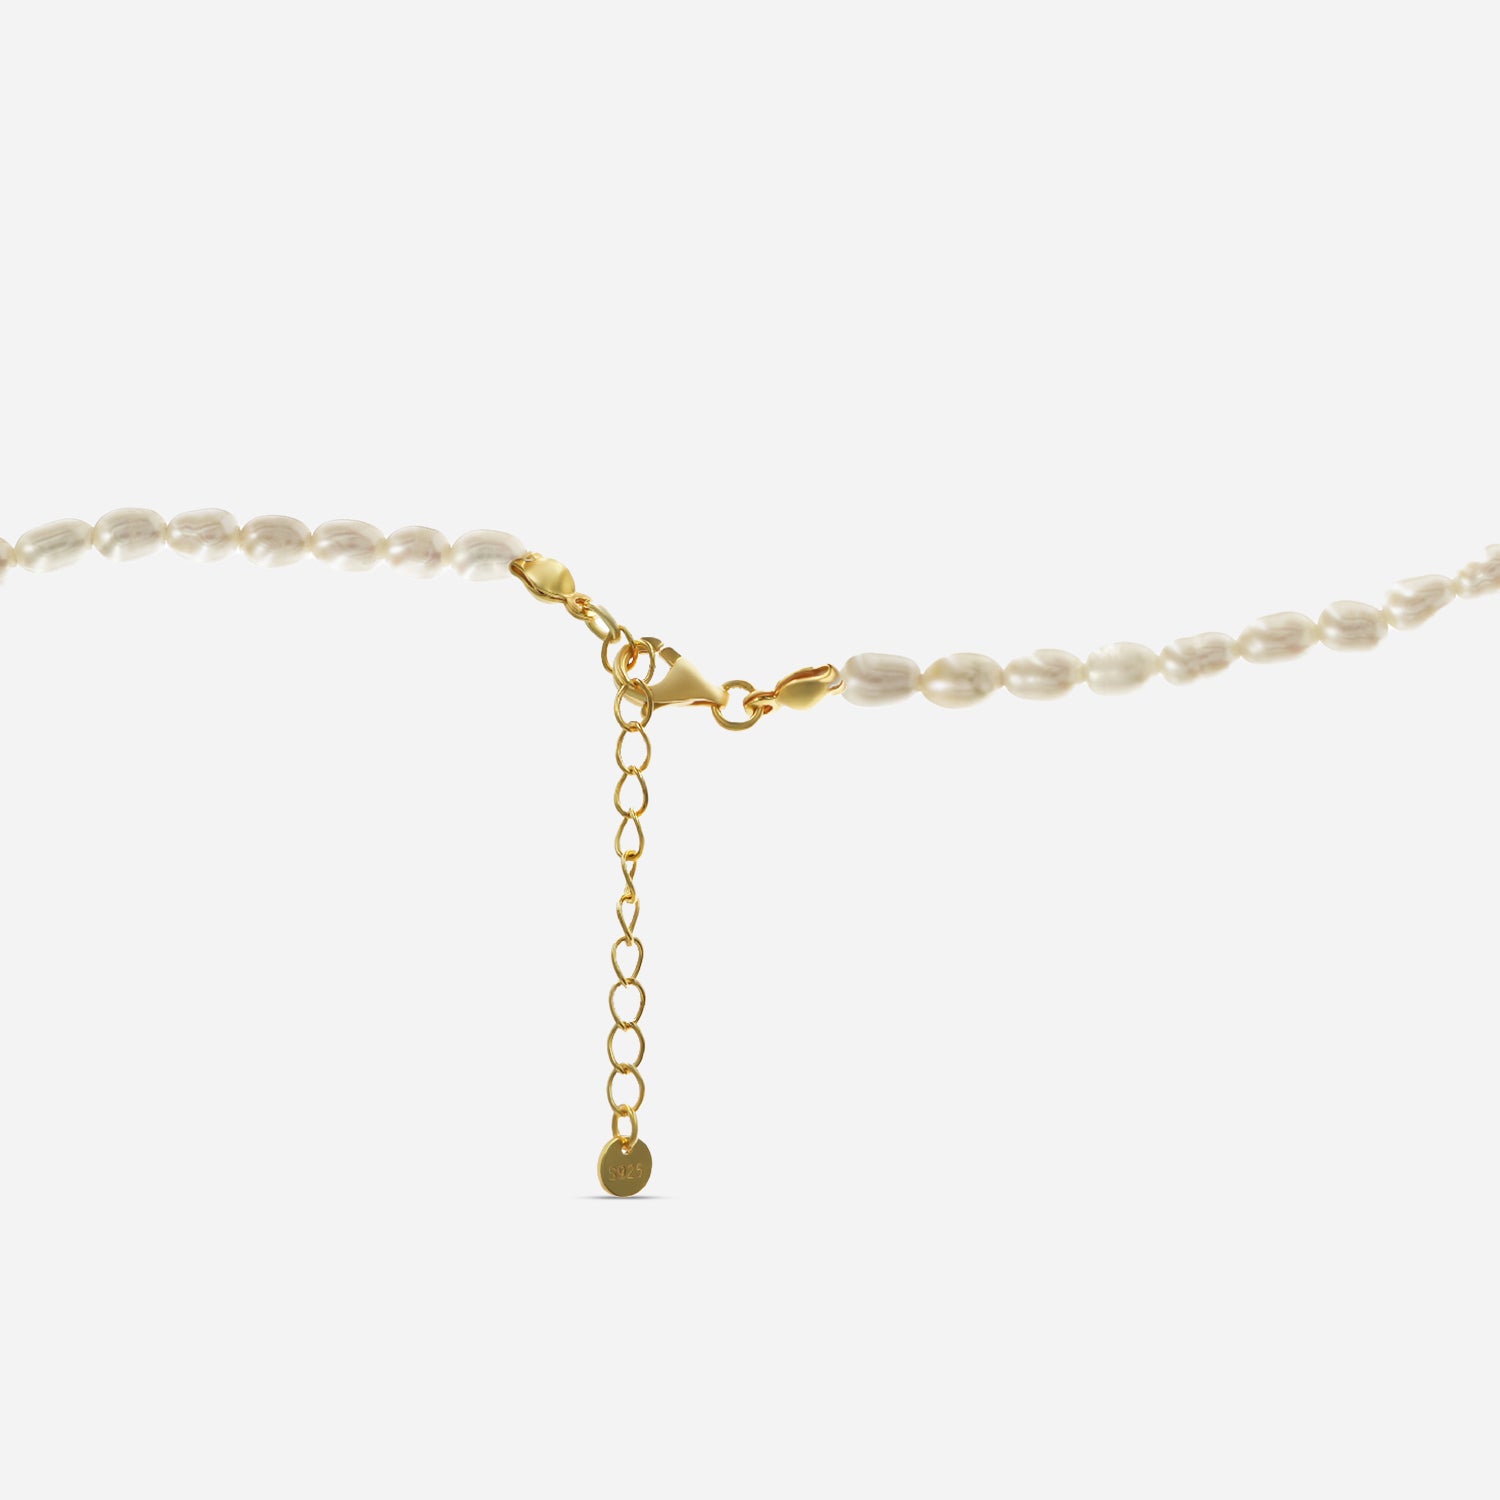 Pearl necklace "Marina" - Gold